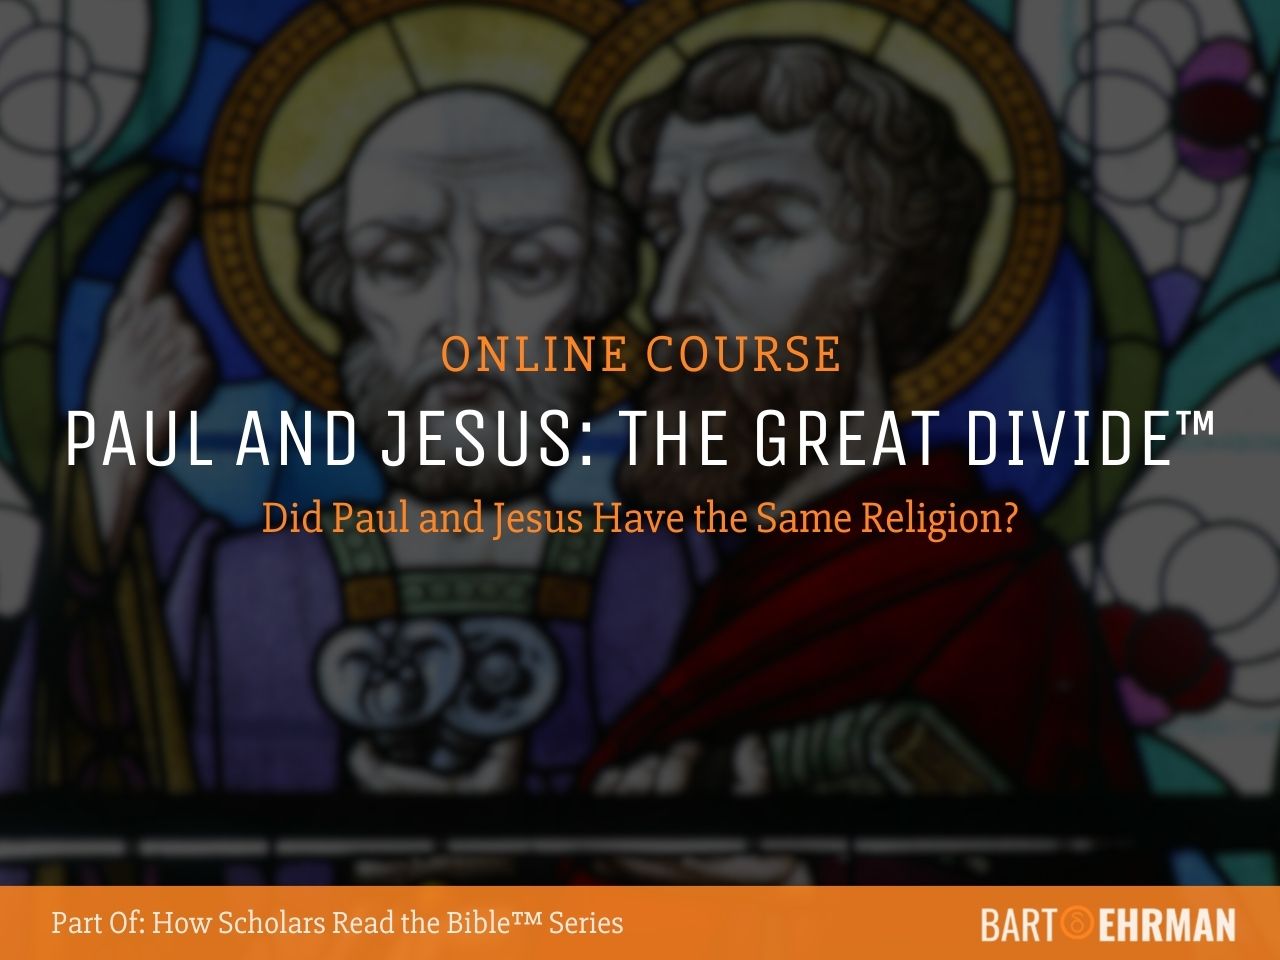 Jesus and Paul New Course by Bart Ehrman